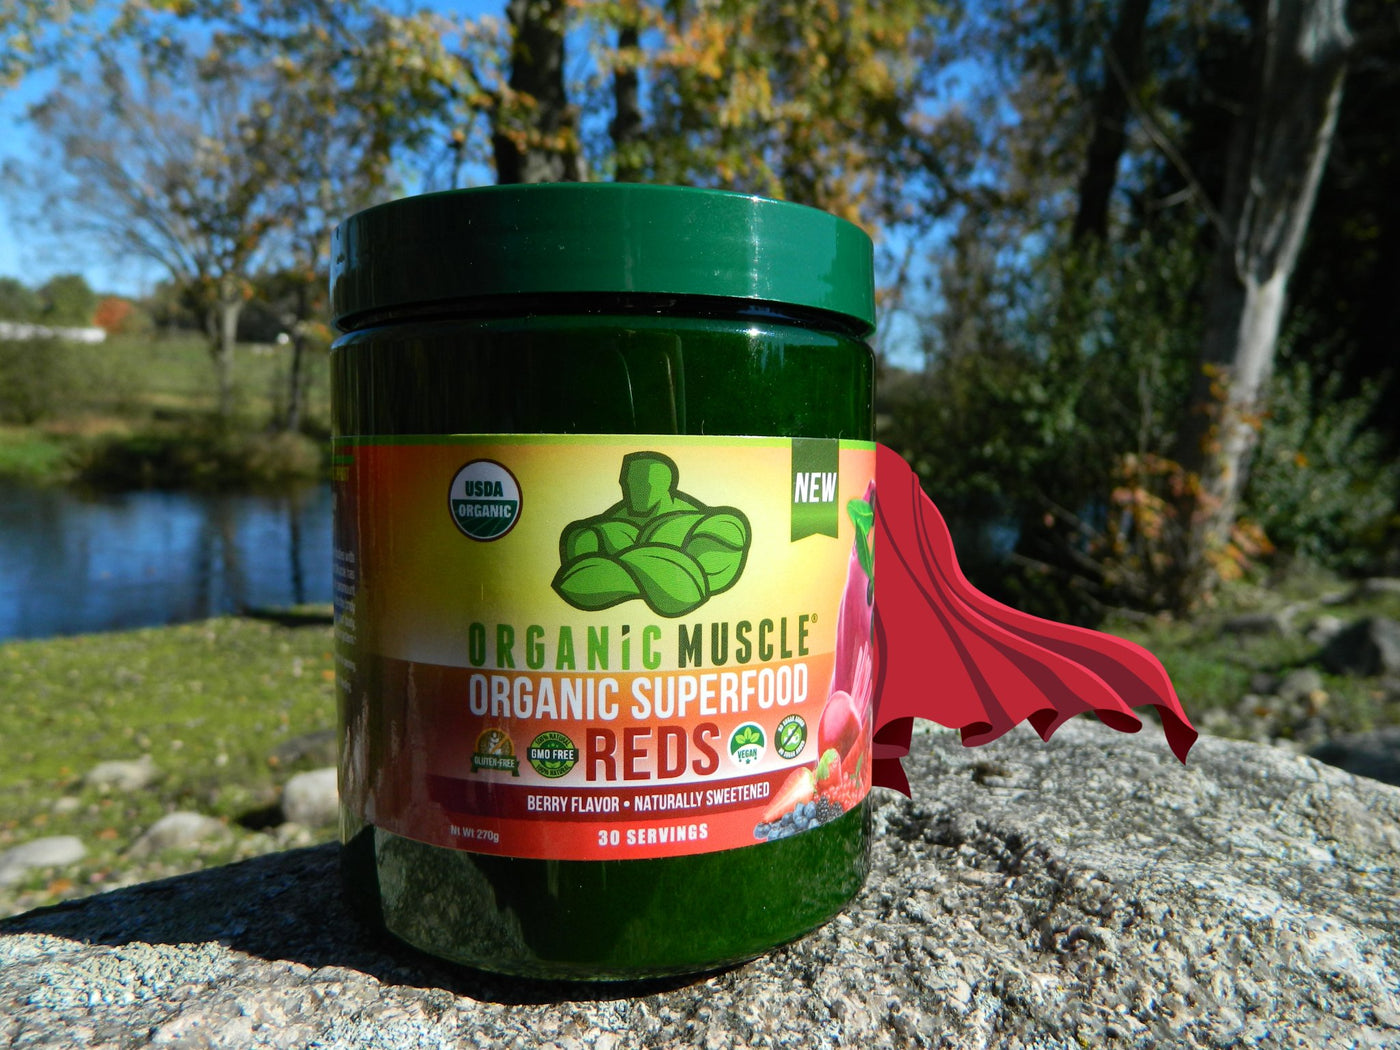 These New Superfood Reds Will Have You Feeling Like Superman! - Organic Muscle Fitness Supplements